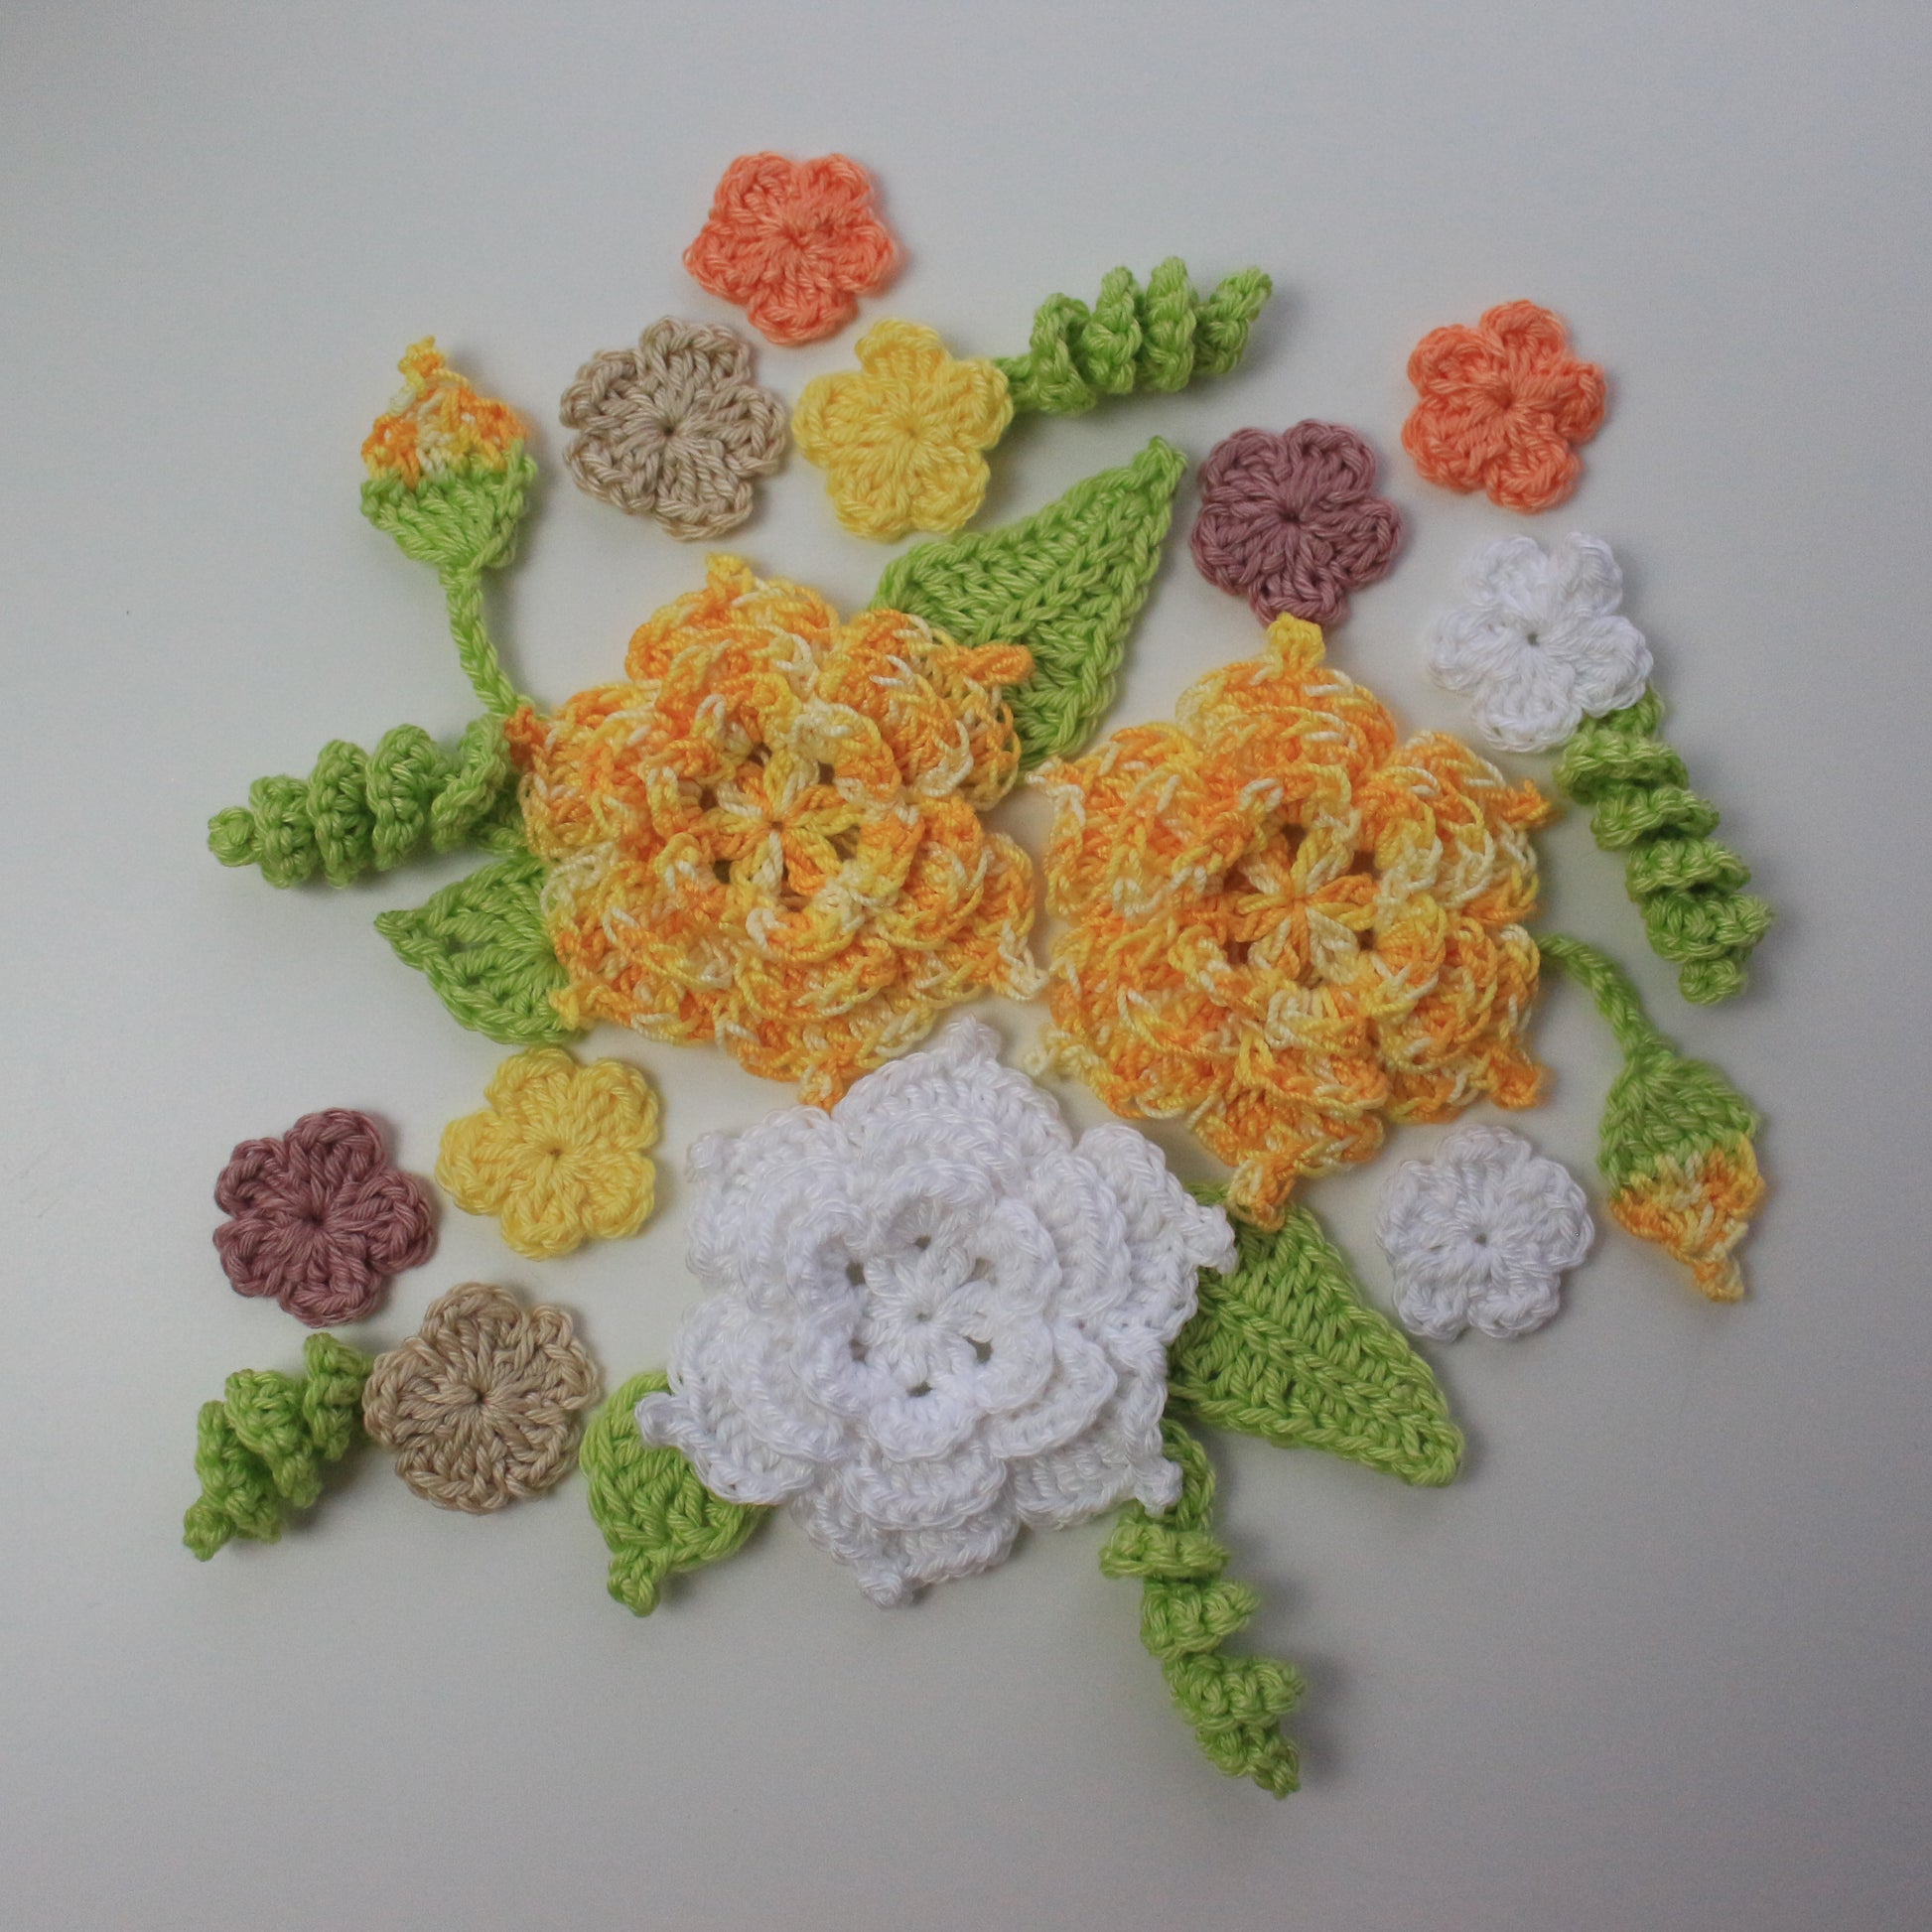 Crochet Garden: Bunches of Flowers, Leaves, and Other Delights